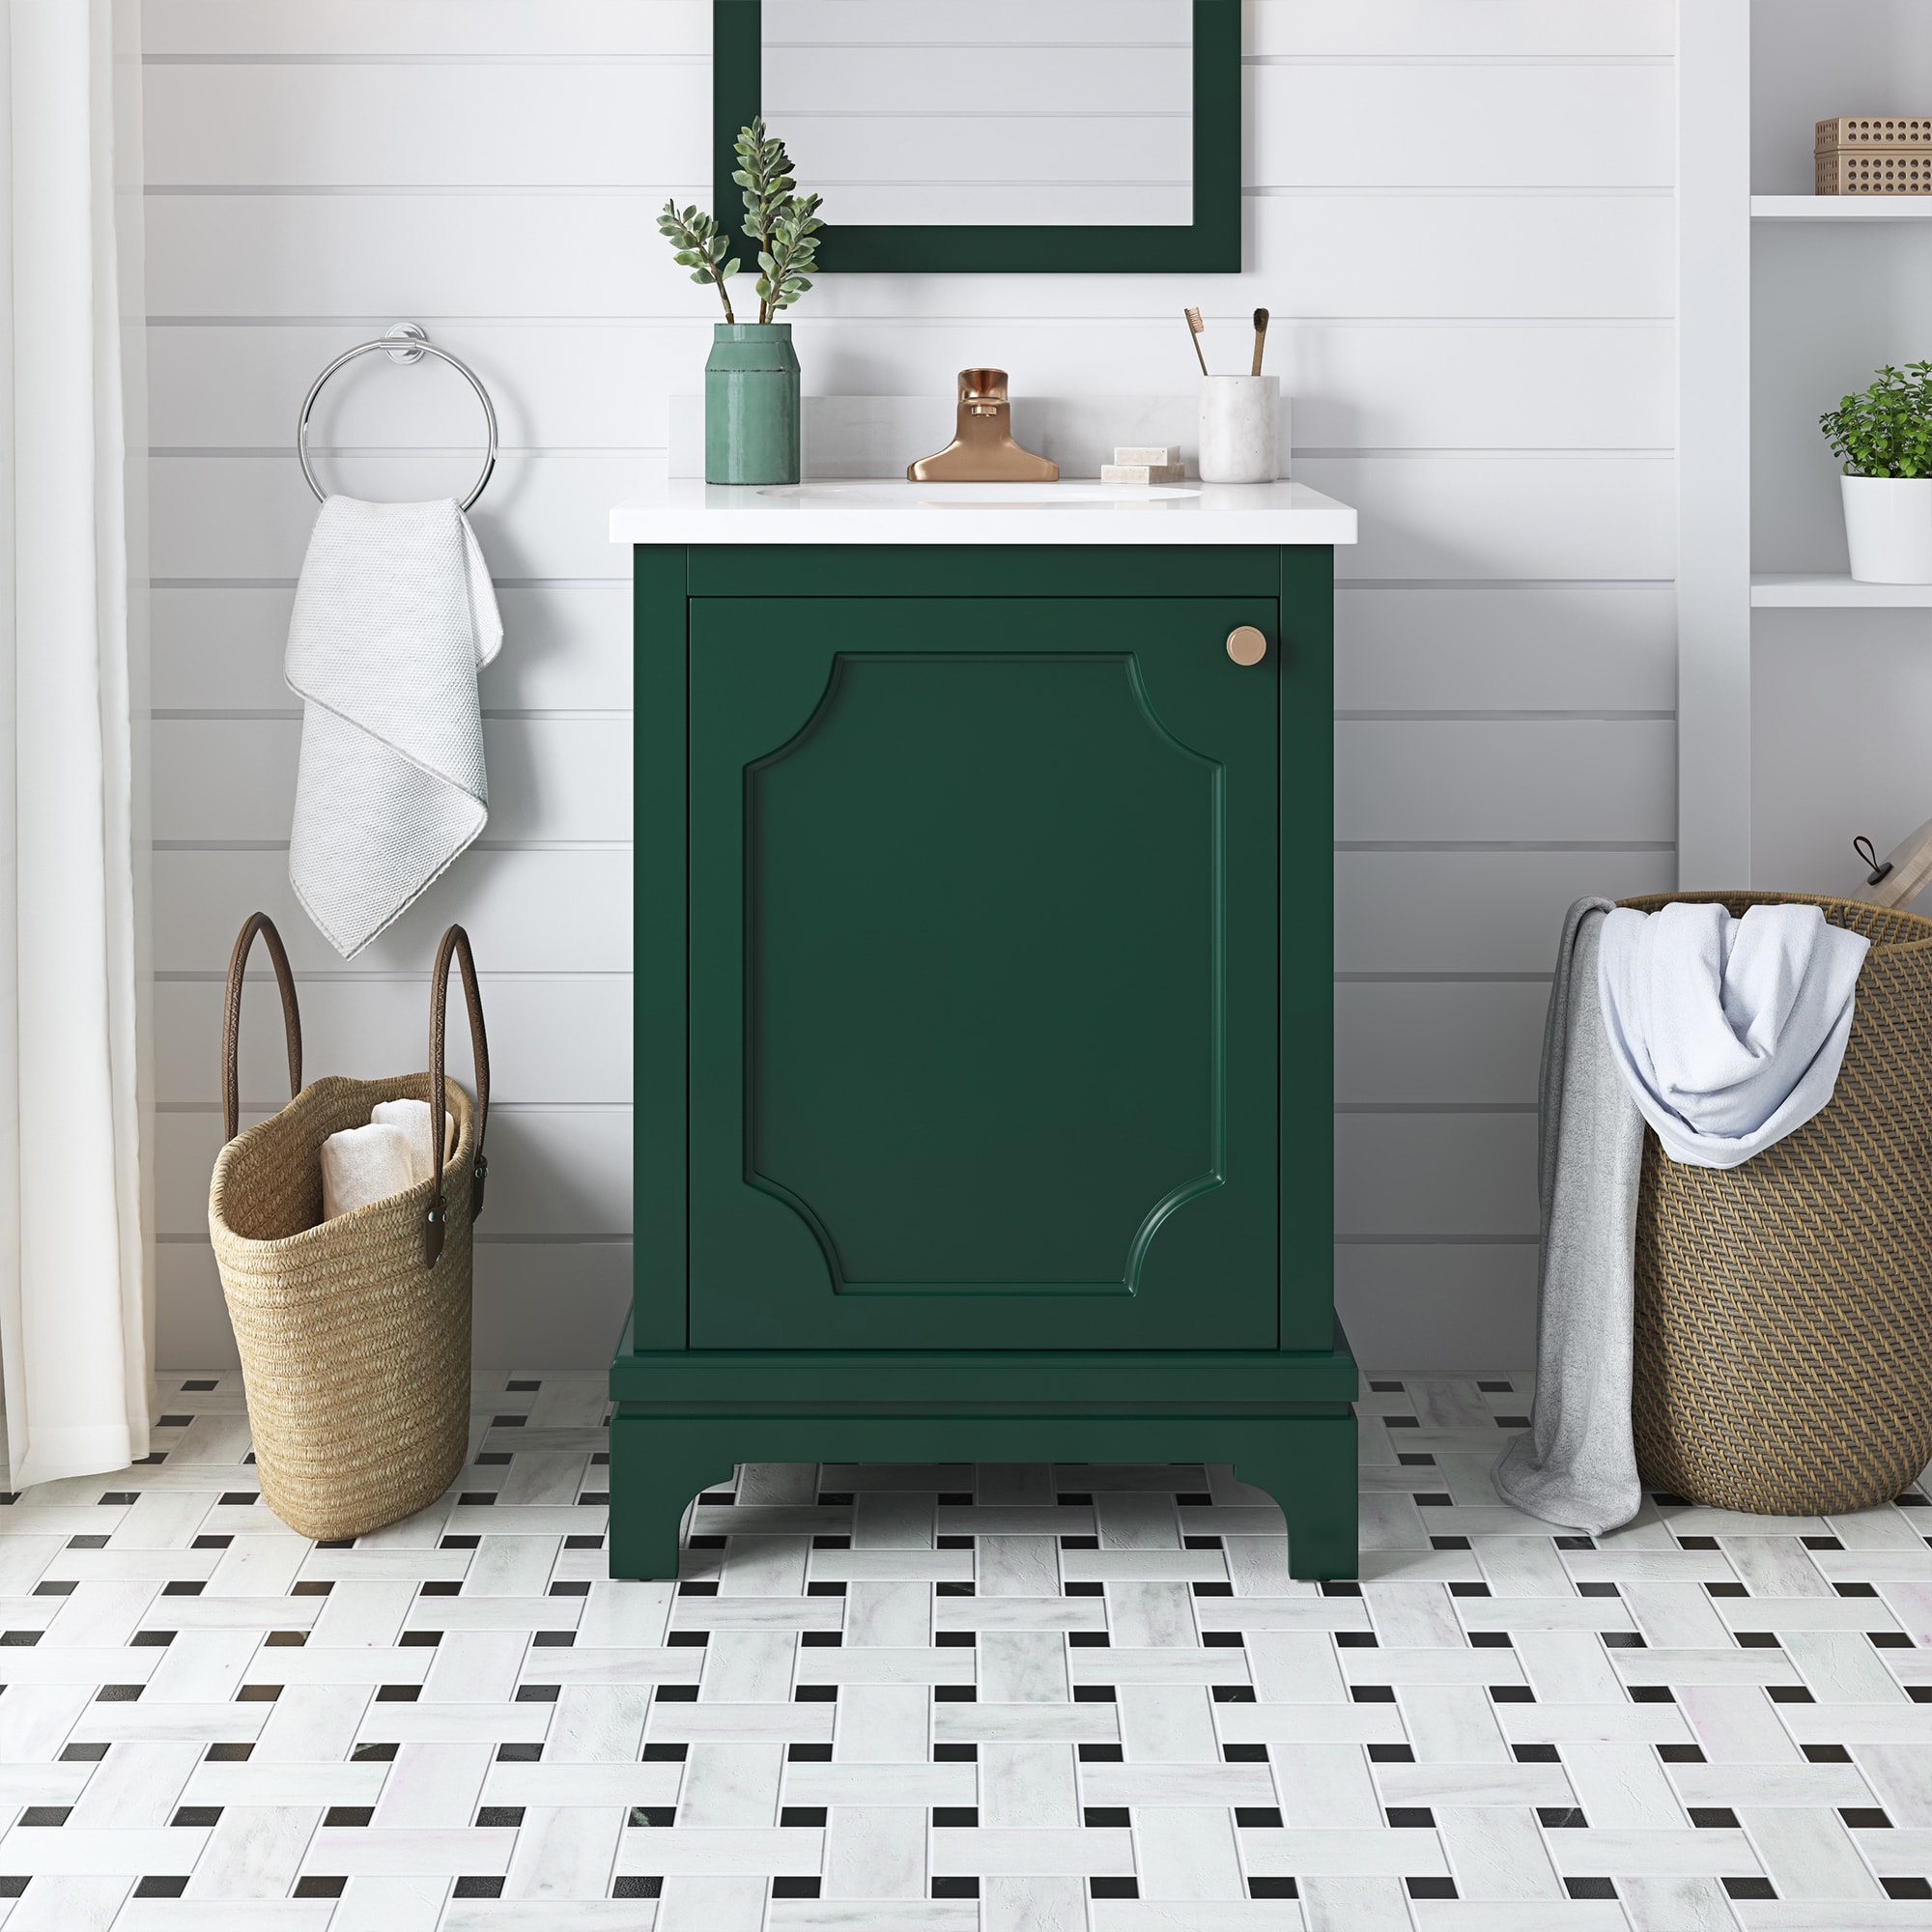 Design Ideas for a Green Vanity and Bathroom